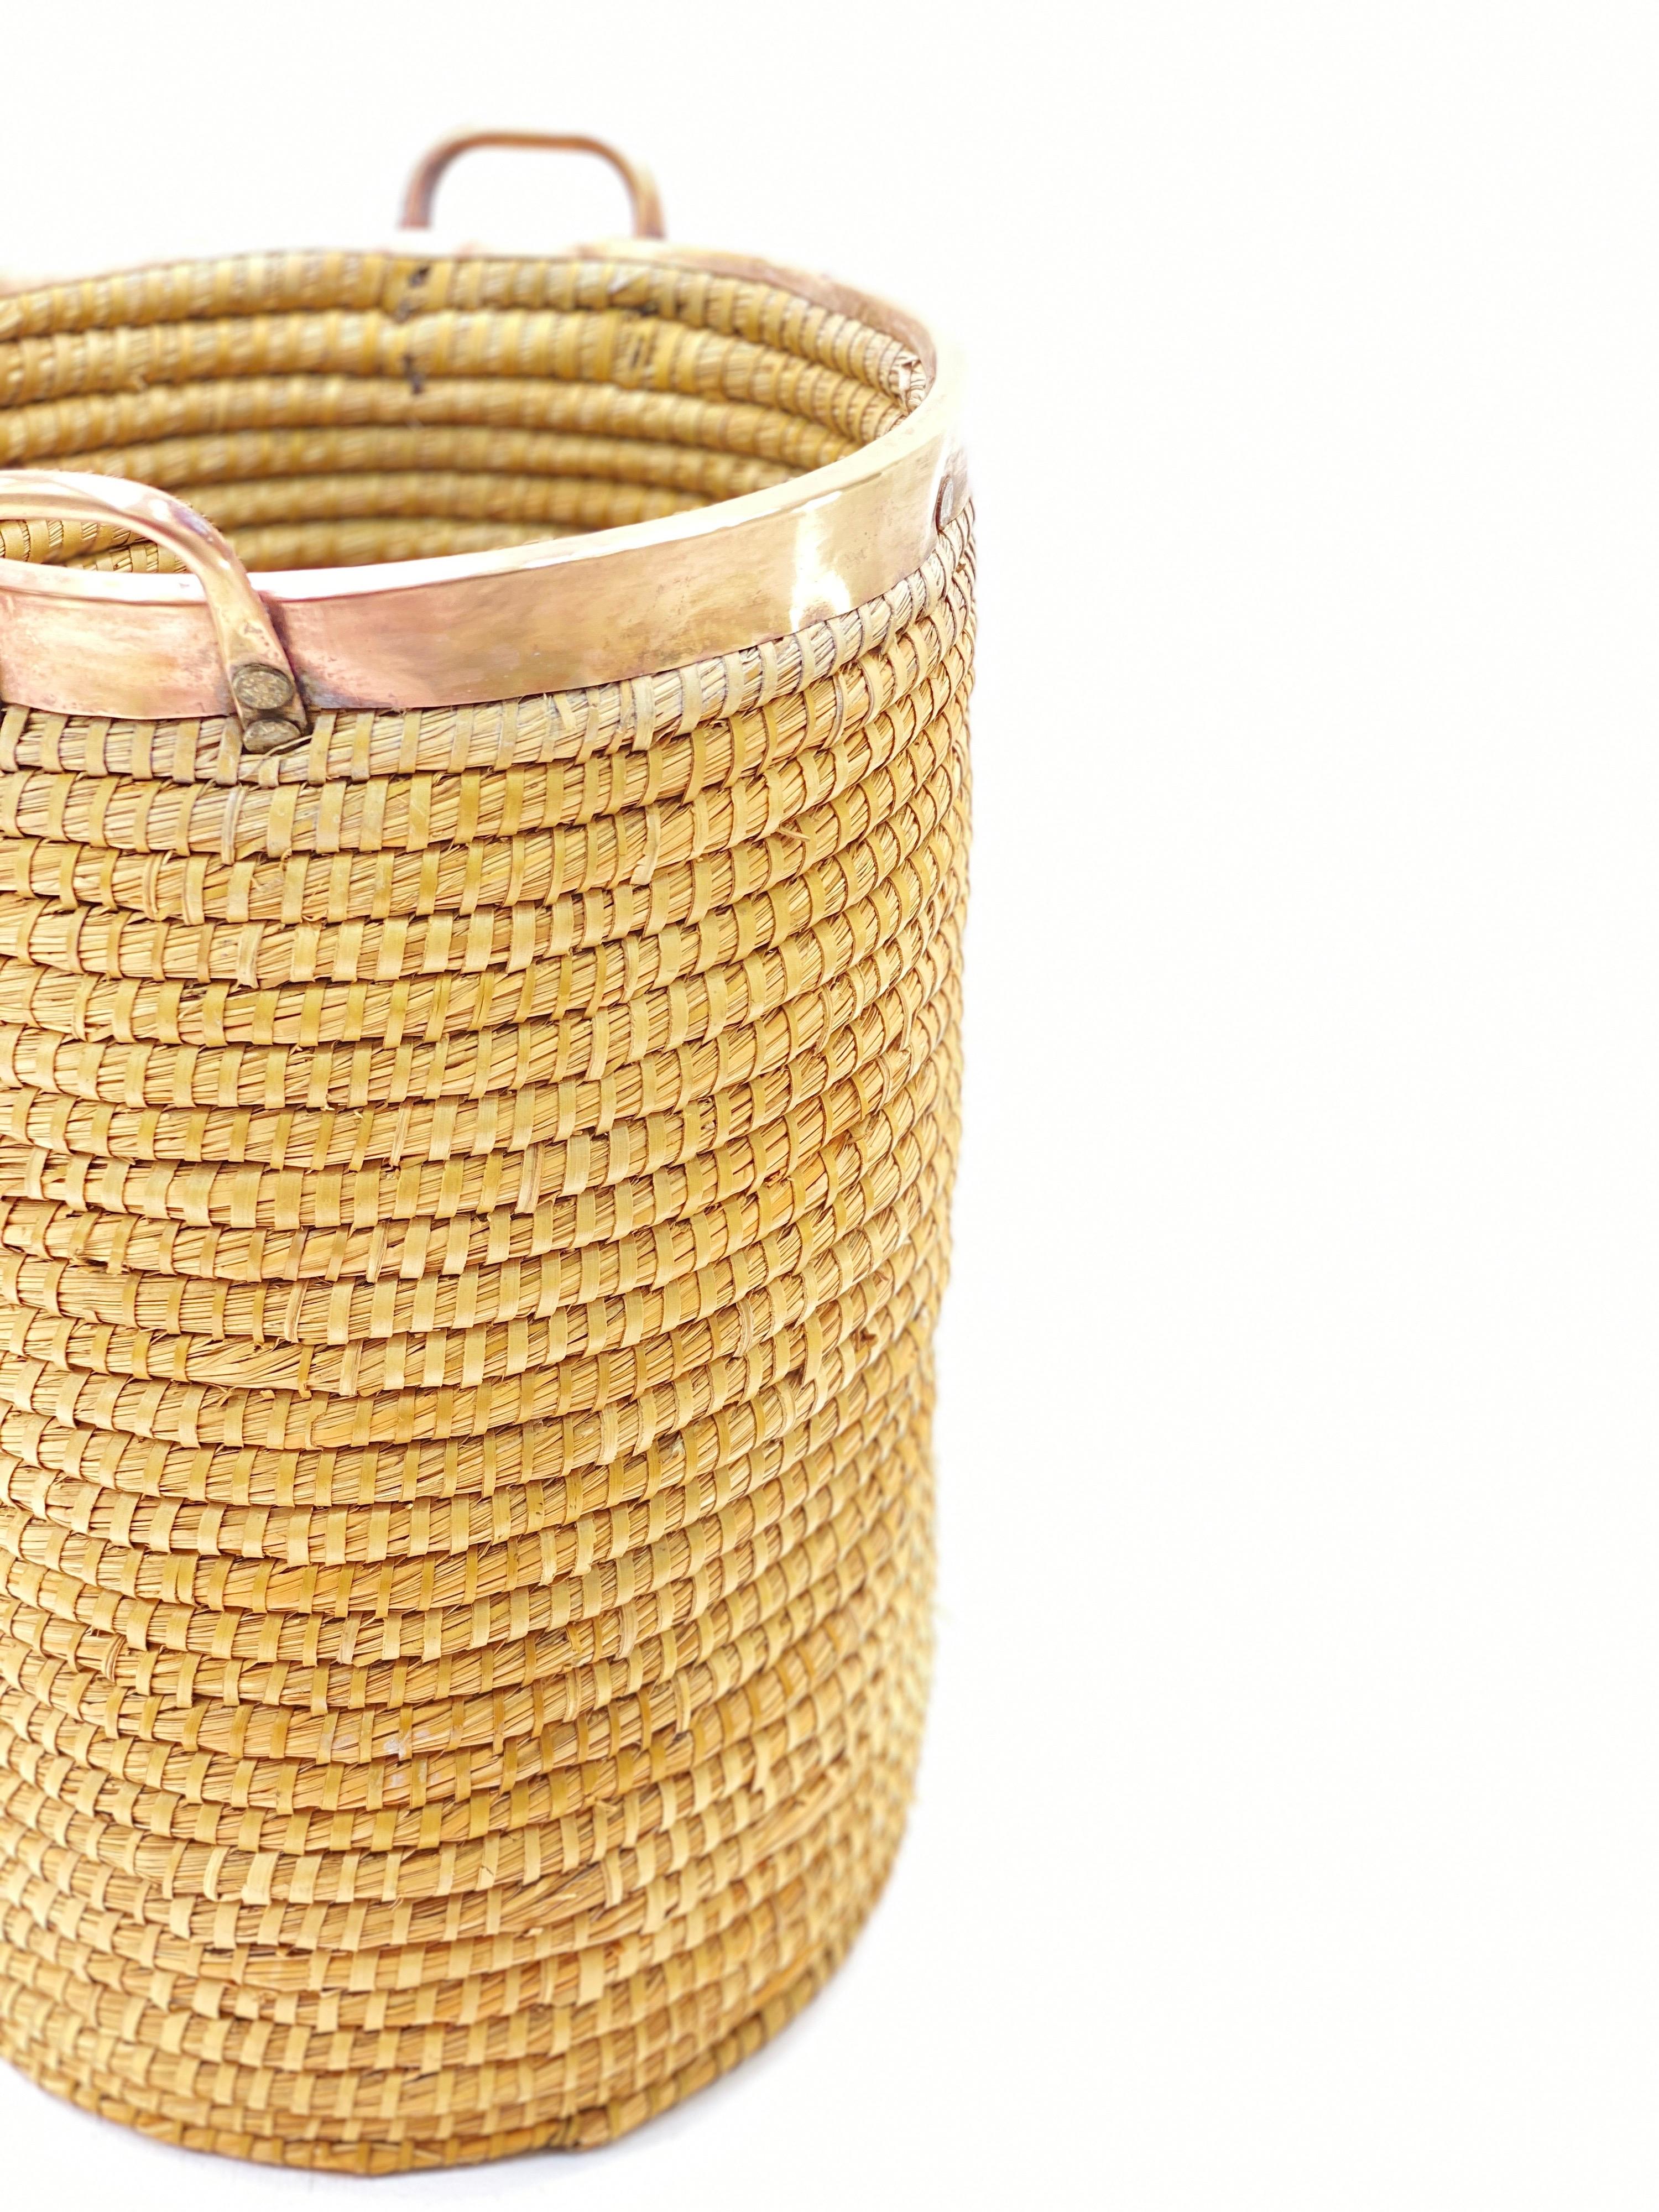 This basket is in rattan, it has been made in Italie in the 1970's.